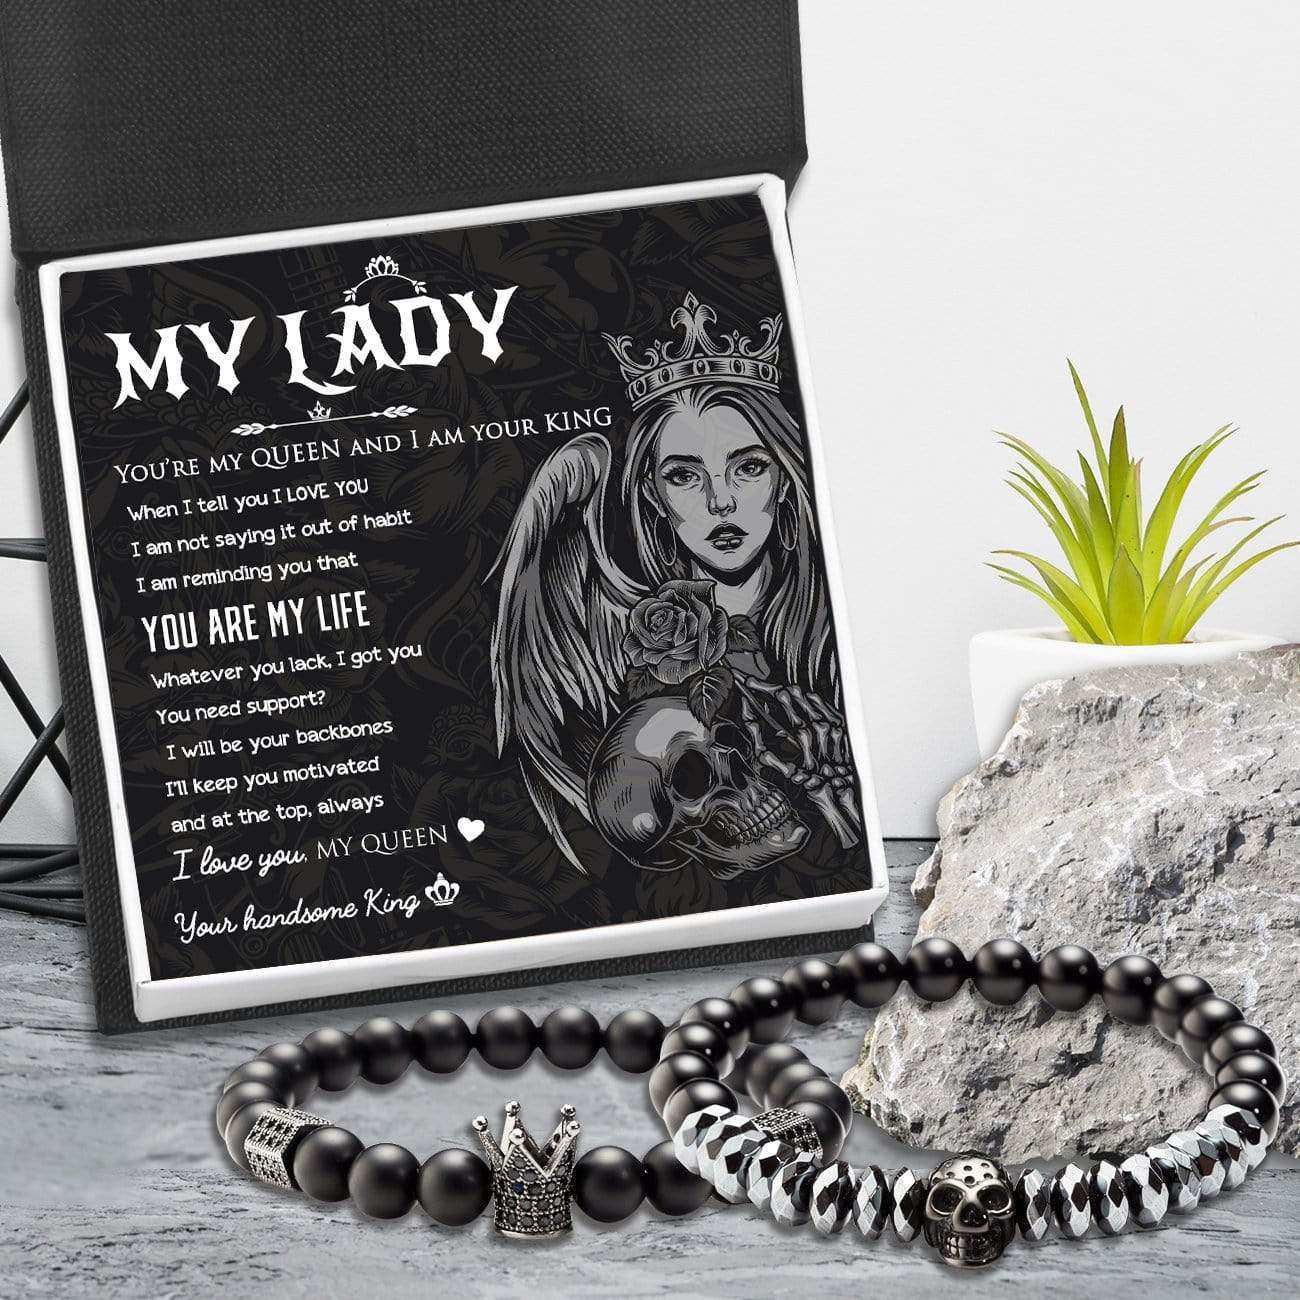 Couple Crown and Skull Bracelets - To My Lady - You Are My Life - Ukgbu13001 - Love My Soulmate